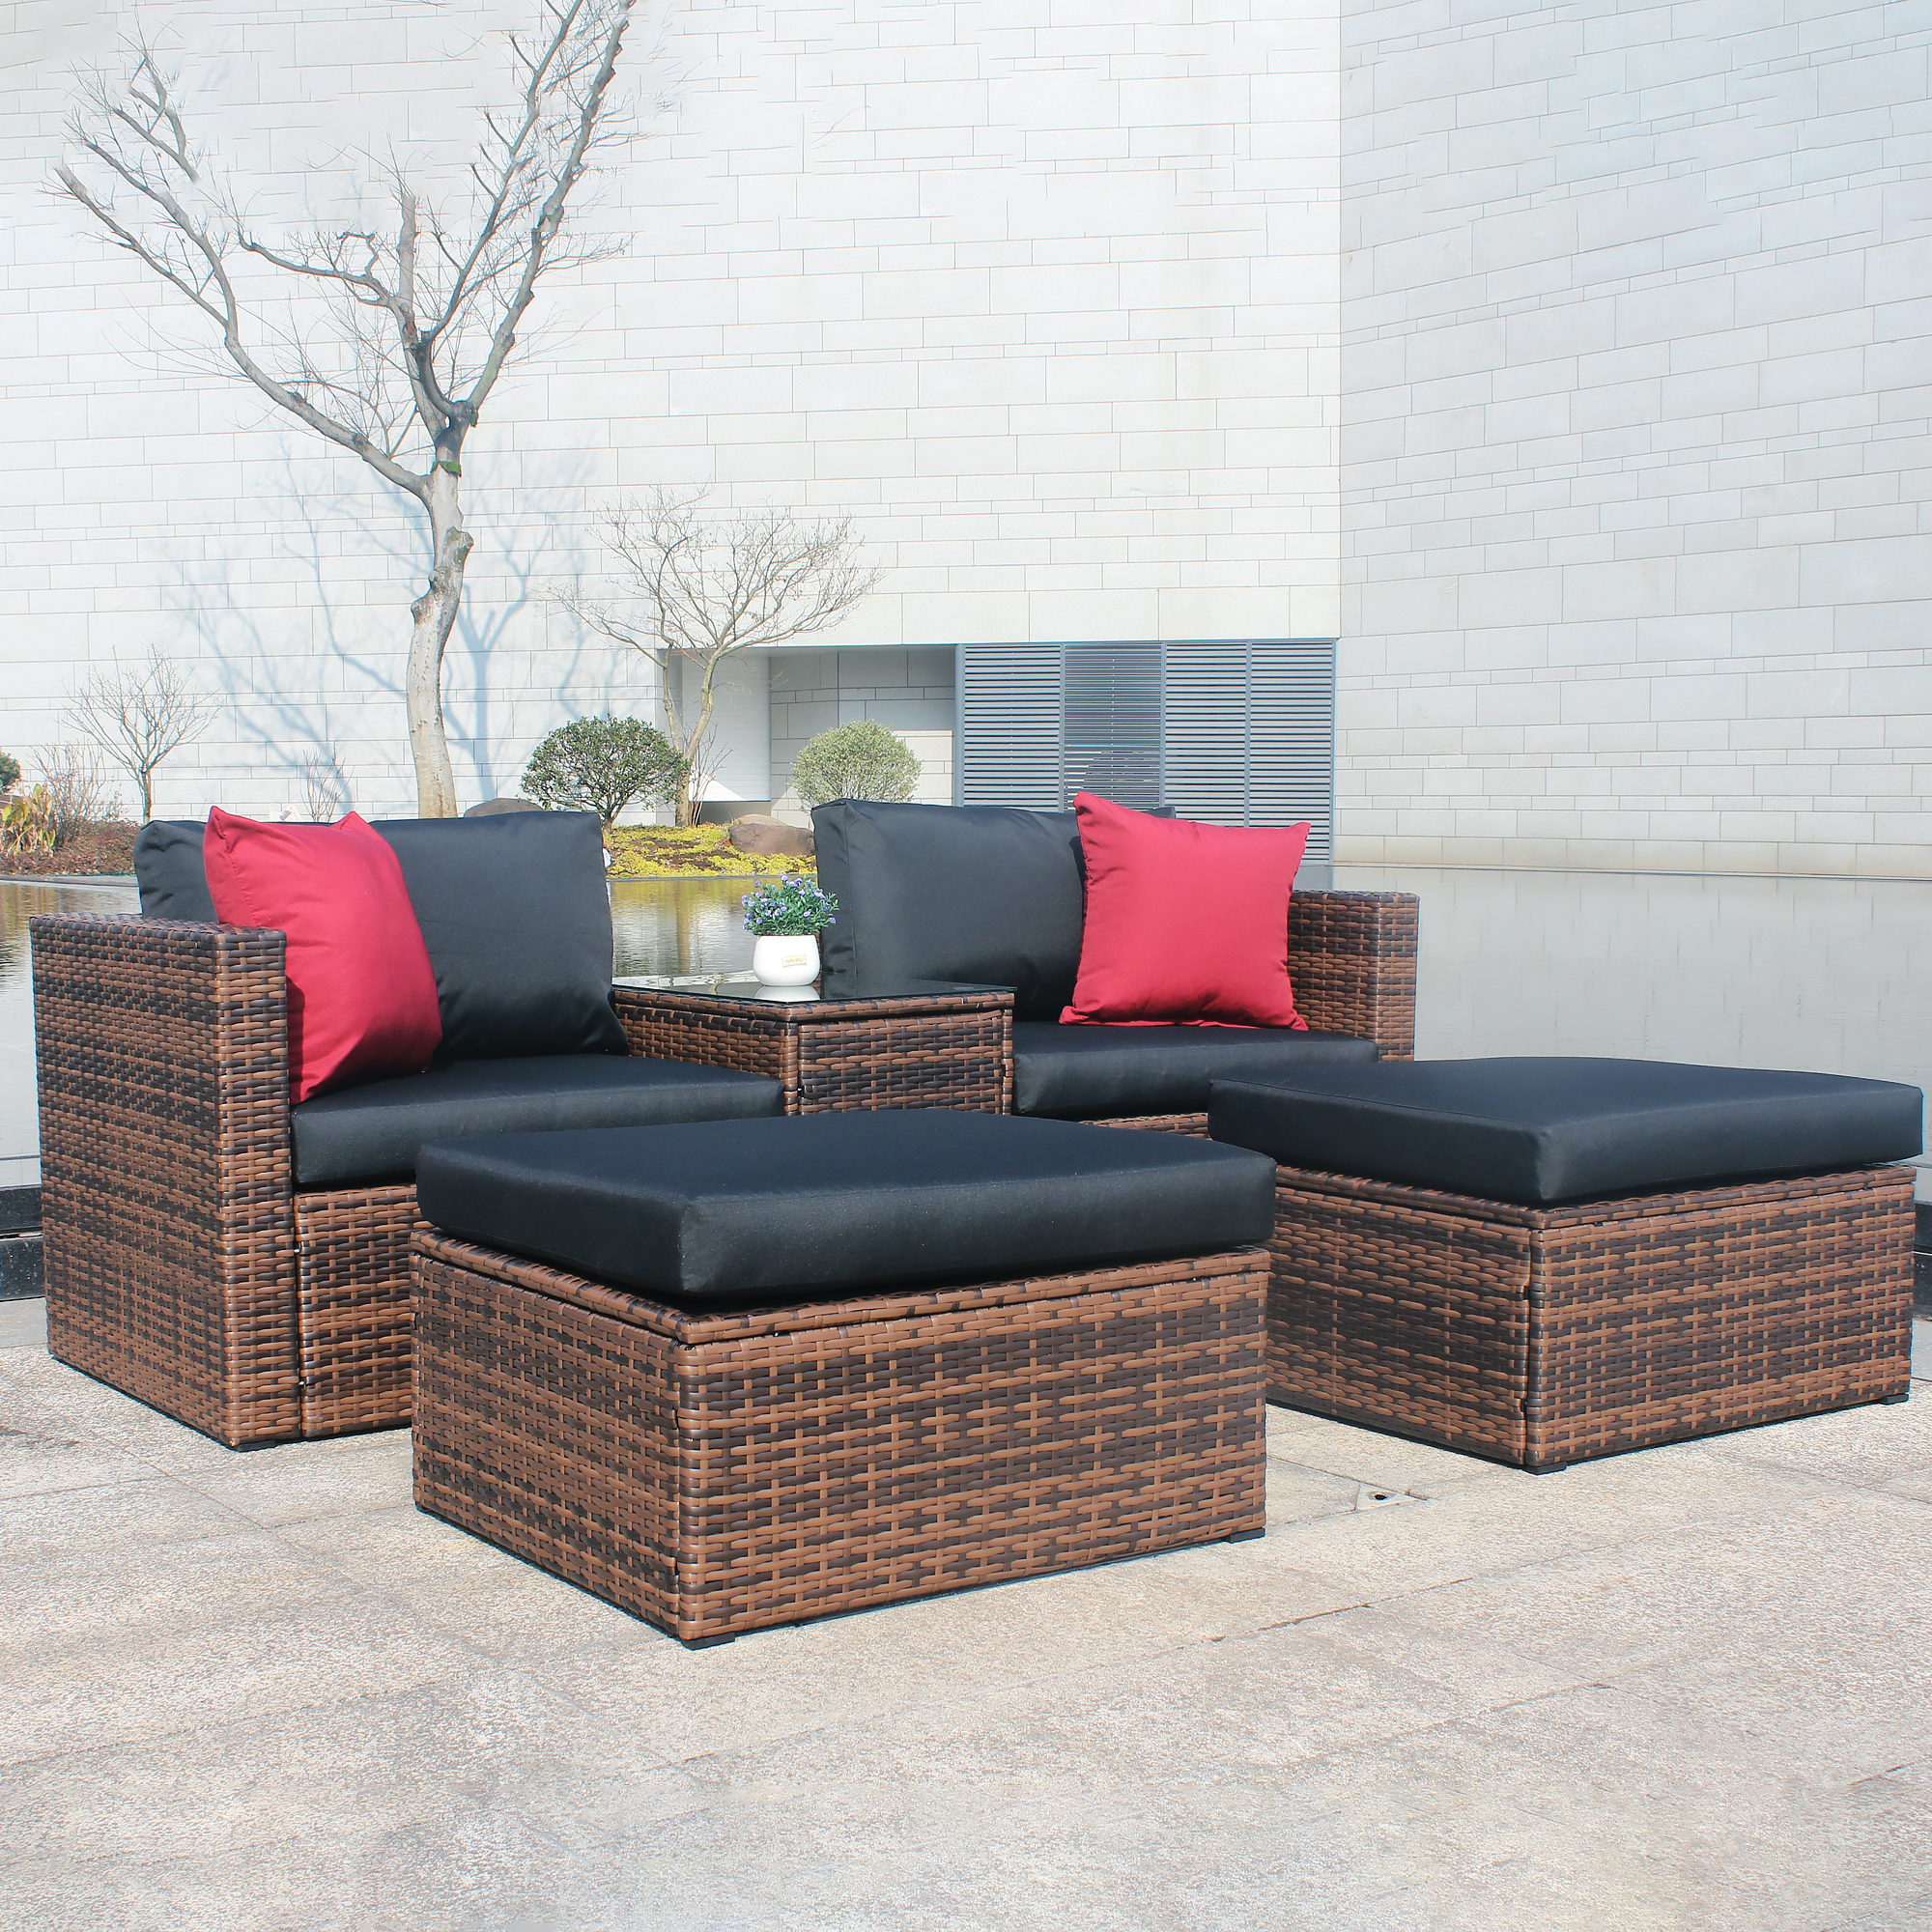 SESSLIFE 5-Piece Patio Conversation Set, Brown Rattan Patio Sectional Sofa with 2 Corner Chairs, 2 Ottomans, 1 Coffee Table, Patio Couches Sets for Porch Garden Balcony, TE2659 - image 1 of 5